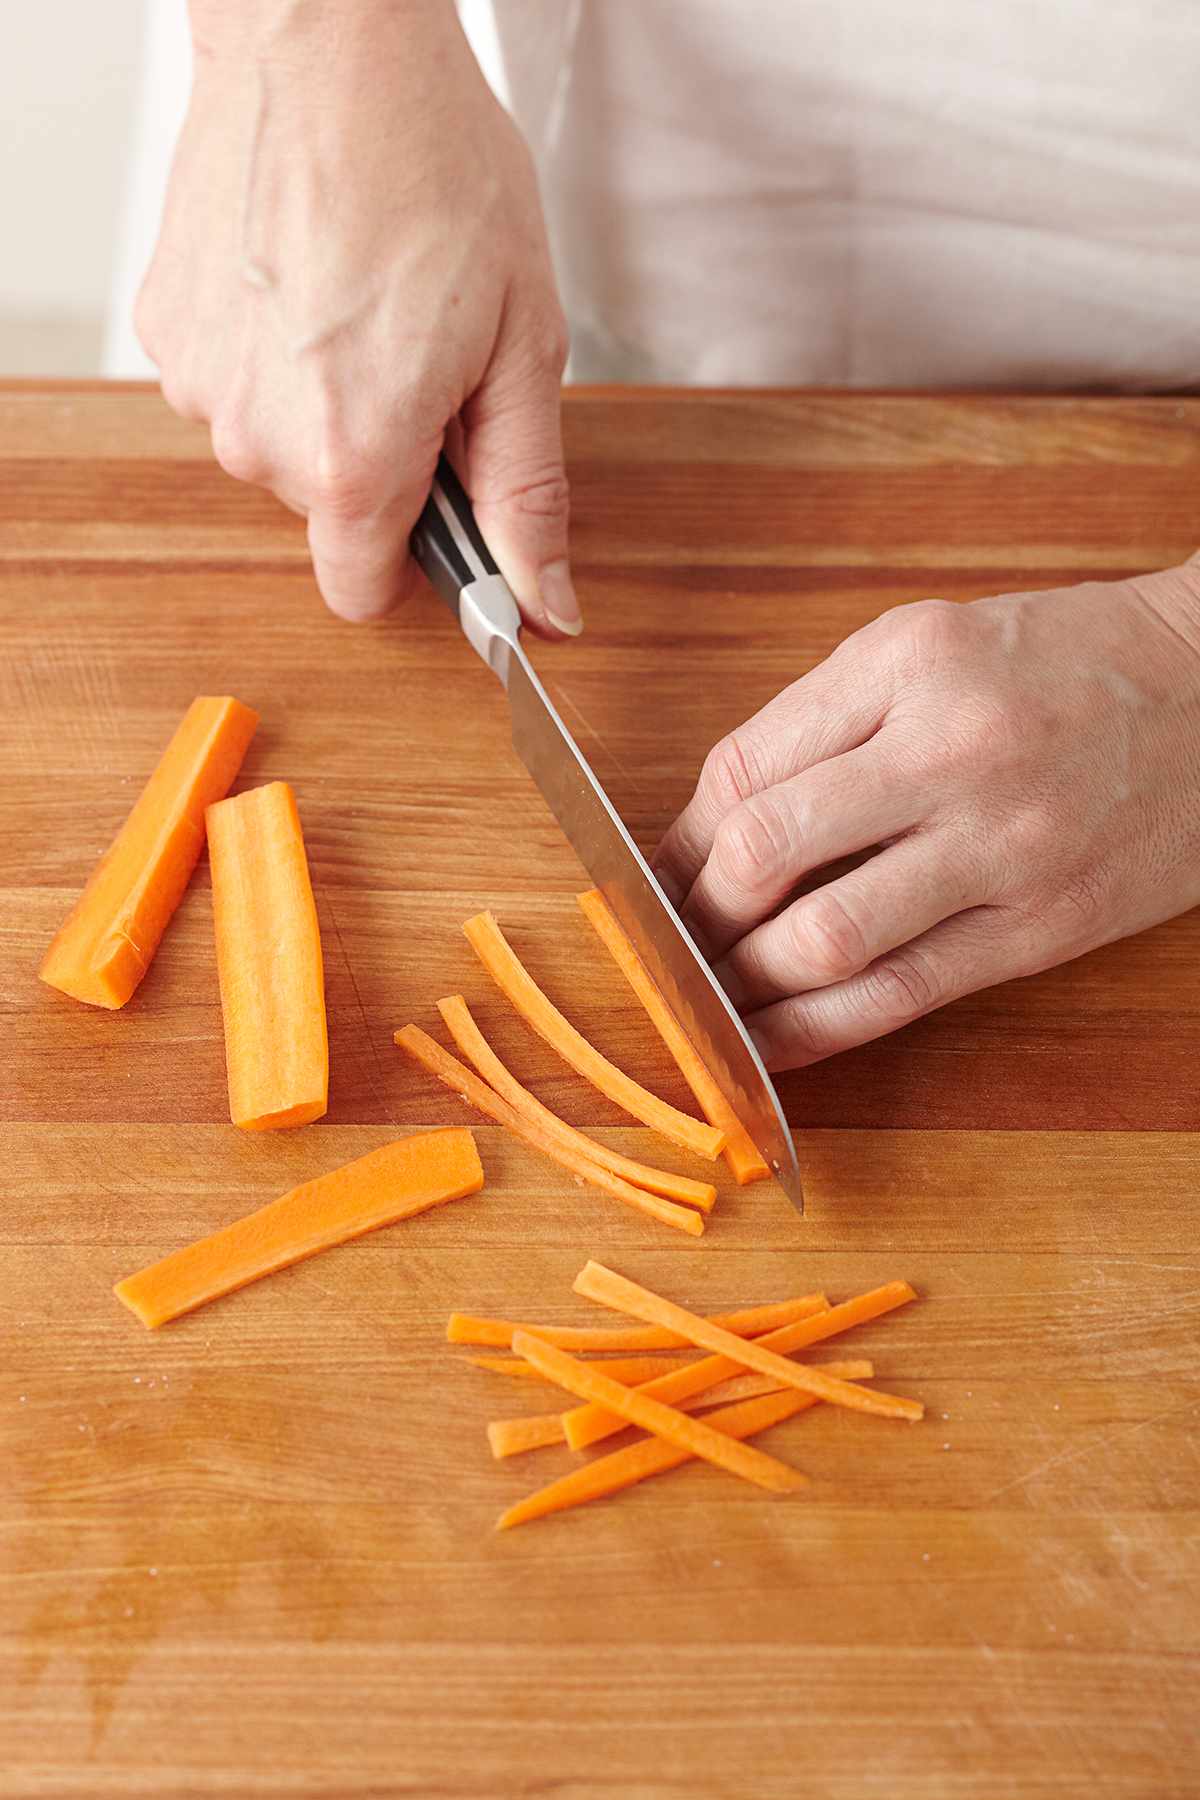 Julienne slicing carrots with knife on cutting board